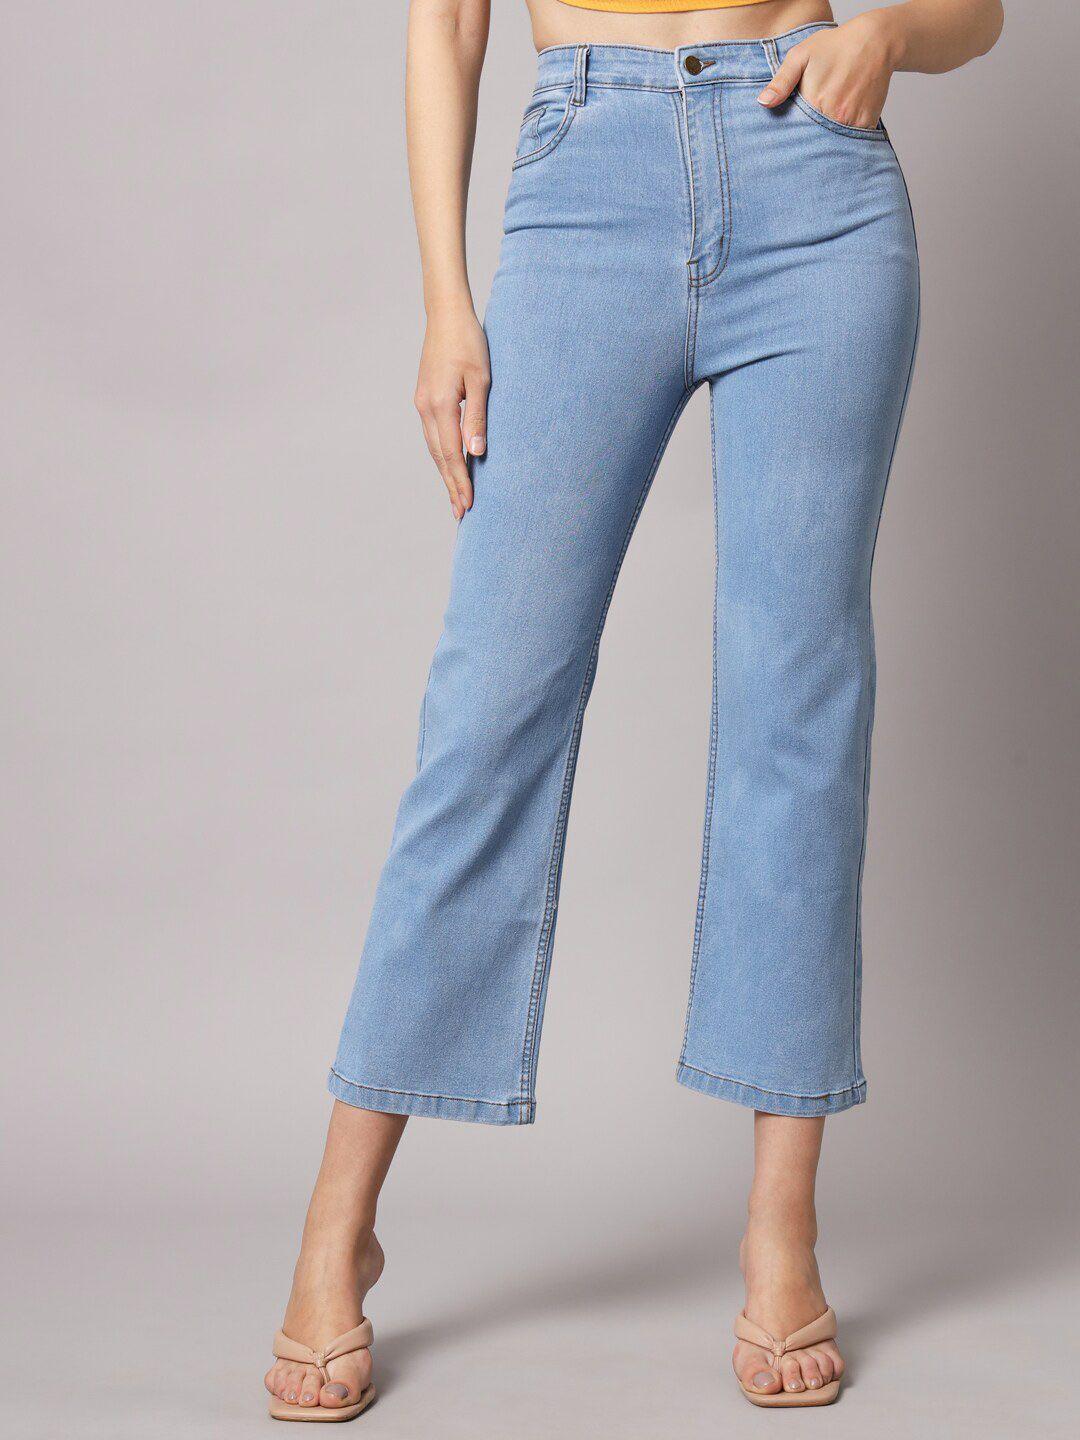 baesd-women-high-rise-light-fade-stretchable-jeans